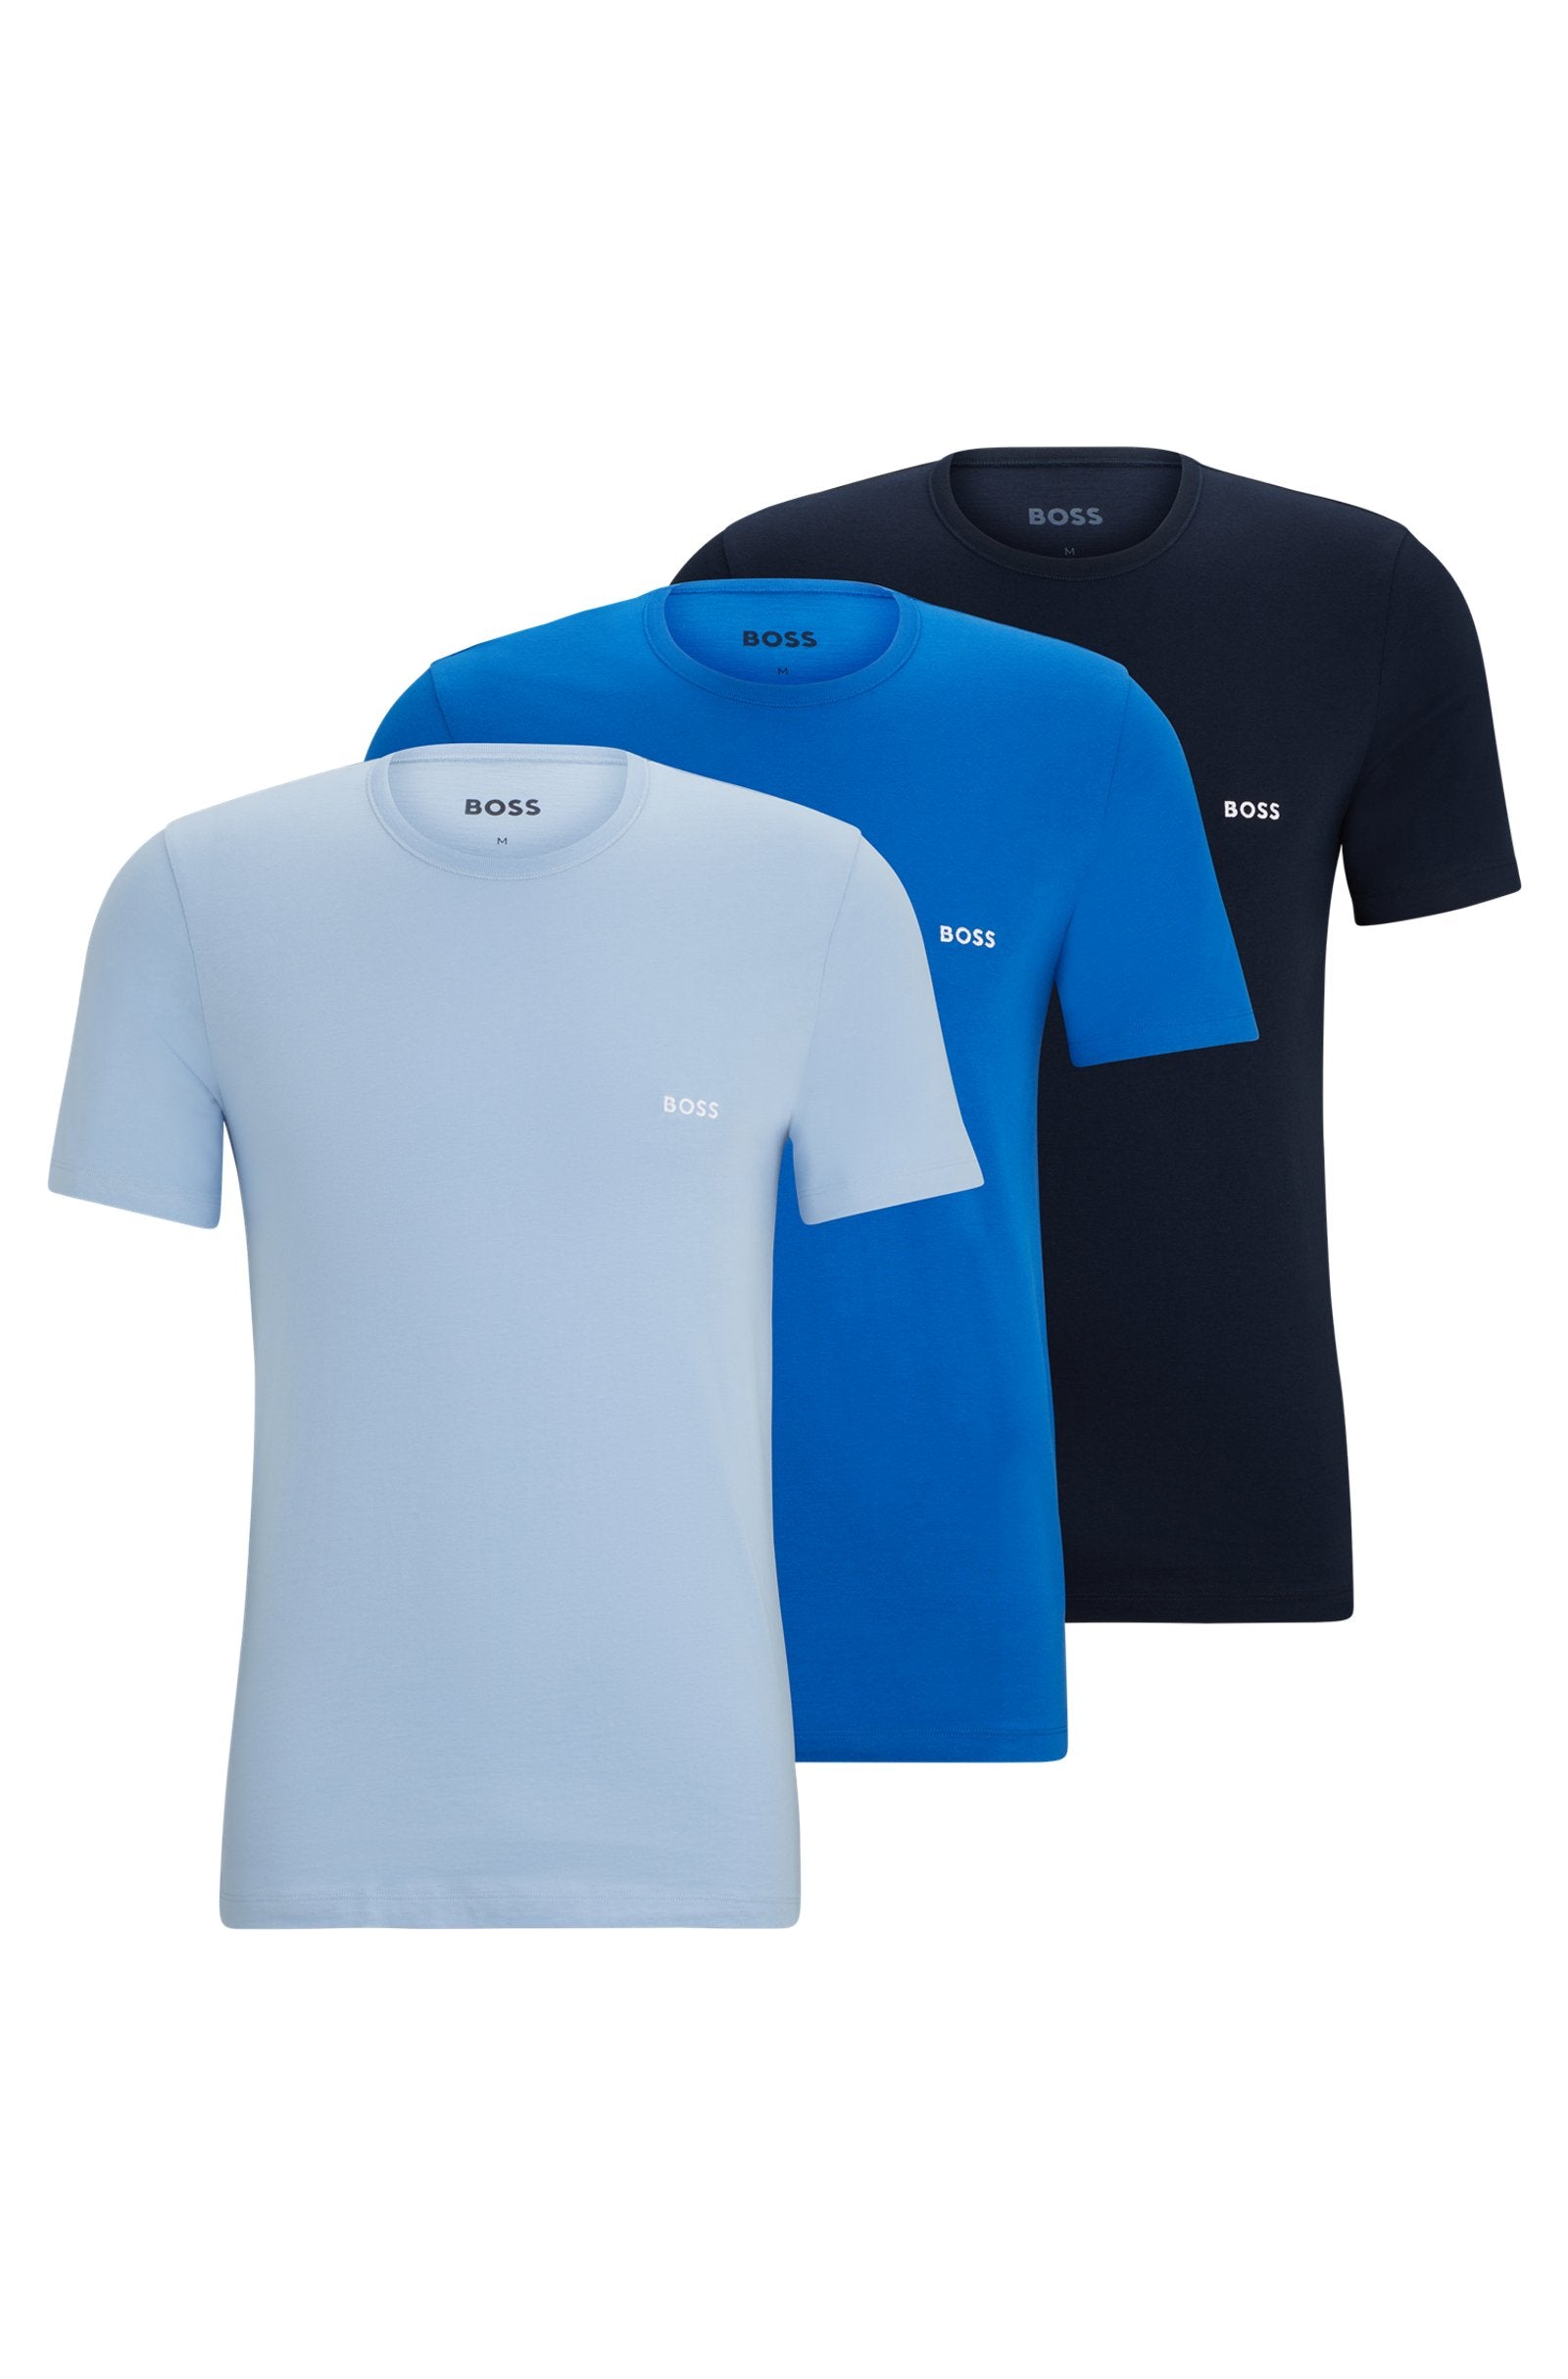 BOSS - 3-Pack Of Underwear T-Shirts In Cotton Jersey 50515002 982